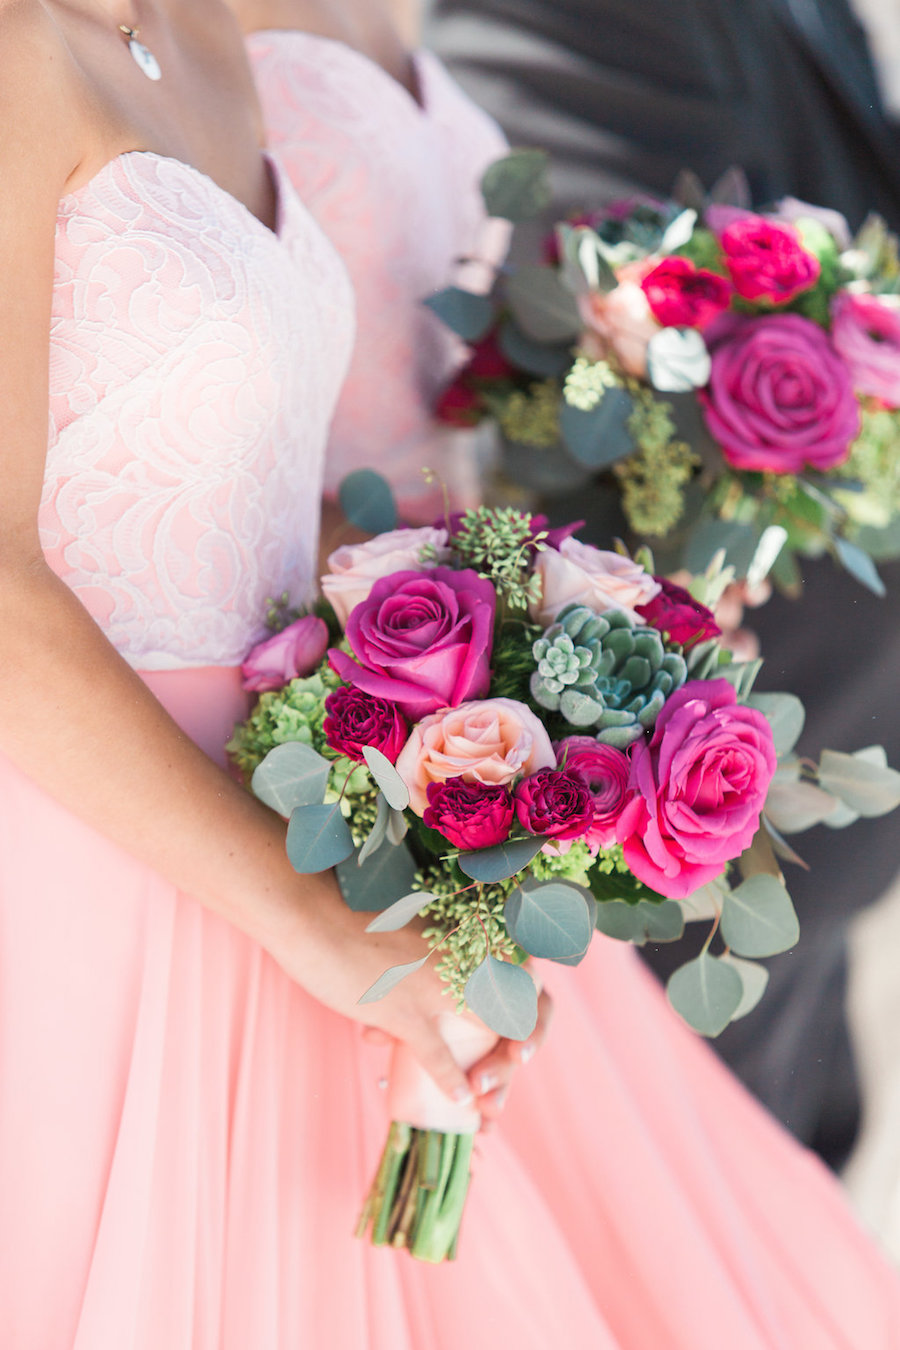 Bridesmaids in Sweetheart Blush Pink Dresses and Peach, Red, and Fuchsia Rose Bouquet with Greenery and Succulents